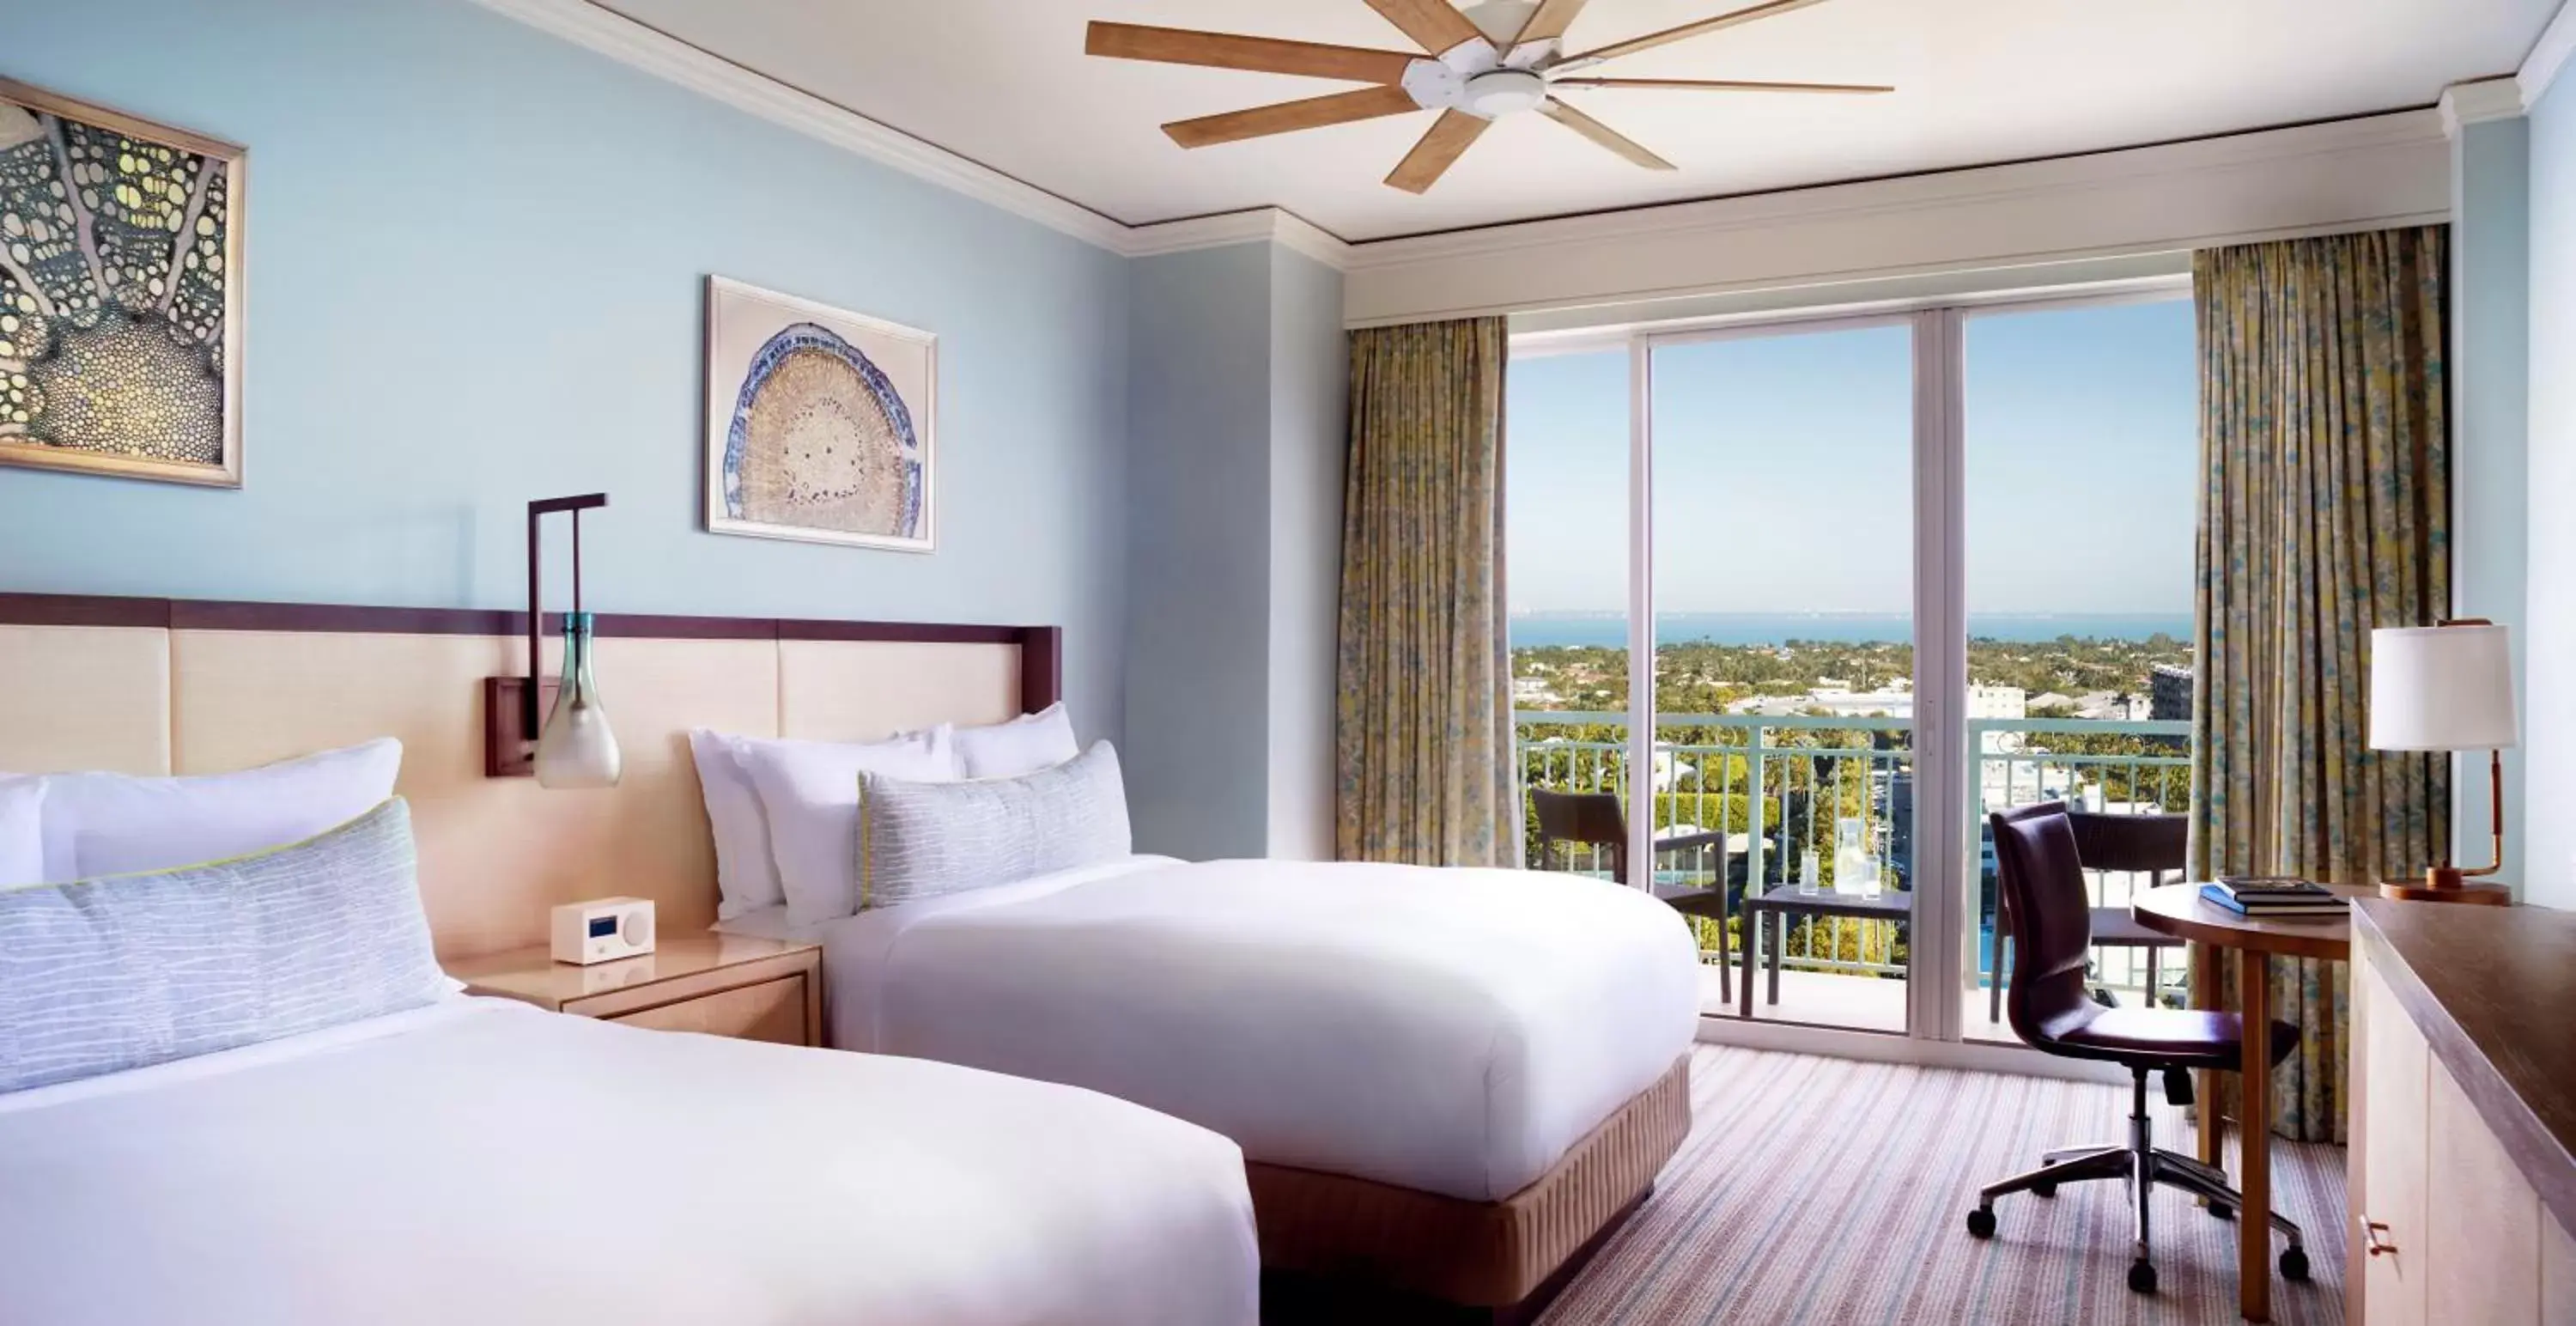 Double Room with Two Double Beds, Balcony and Partial Ocean View in The Ritz Carlton Key Biscayne, Miami